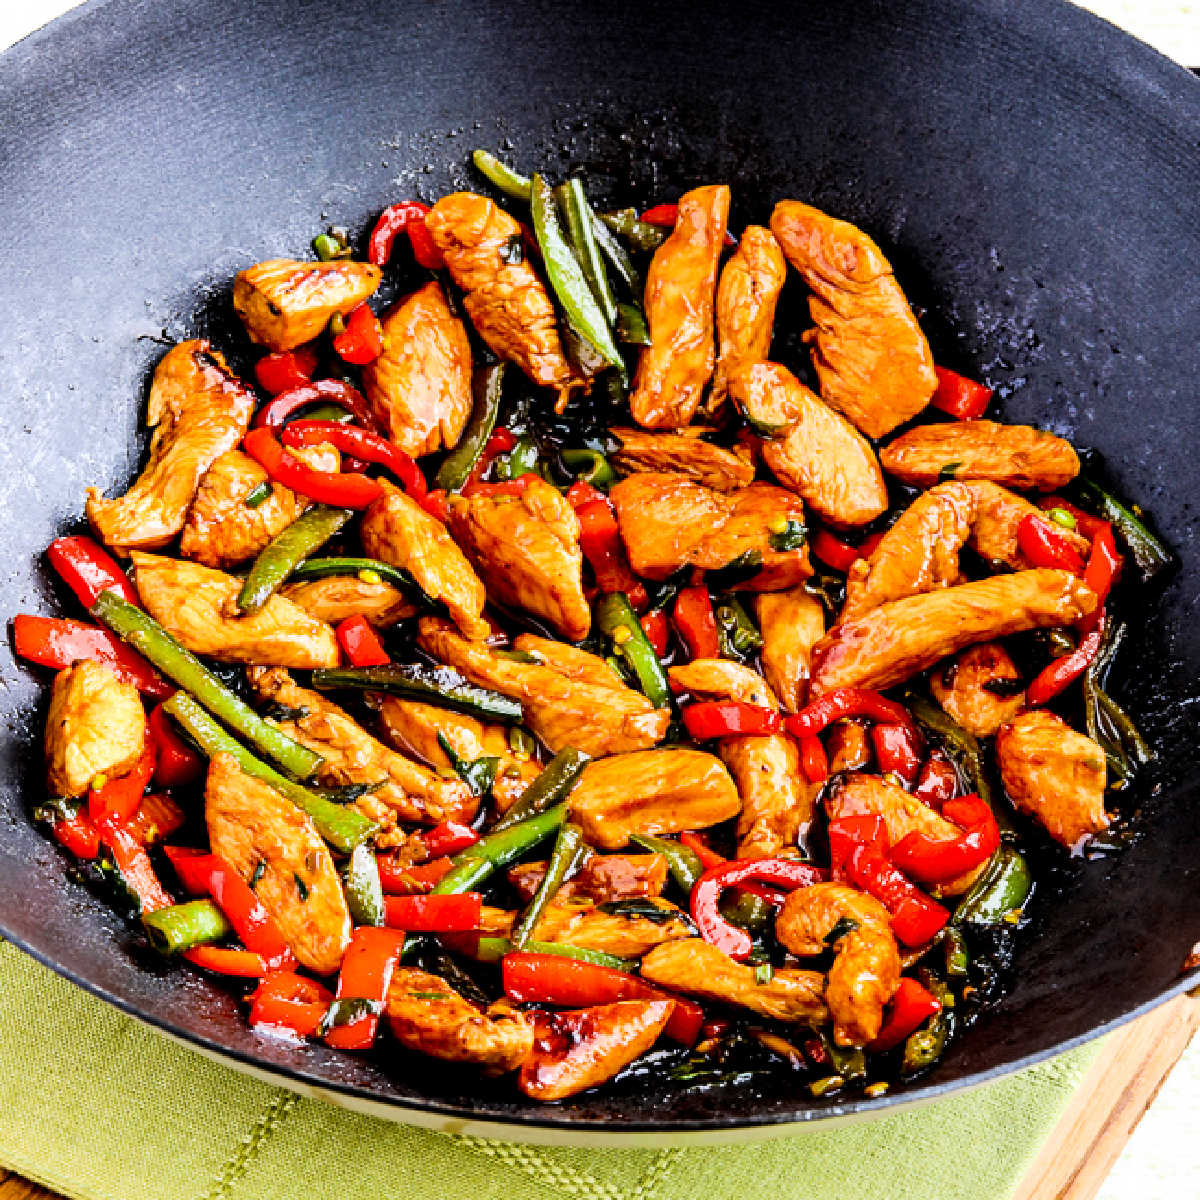 Square image for Ginger Chicken Stir Fry shown in wok, on napkin.